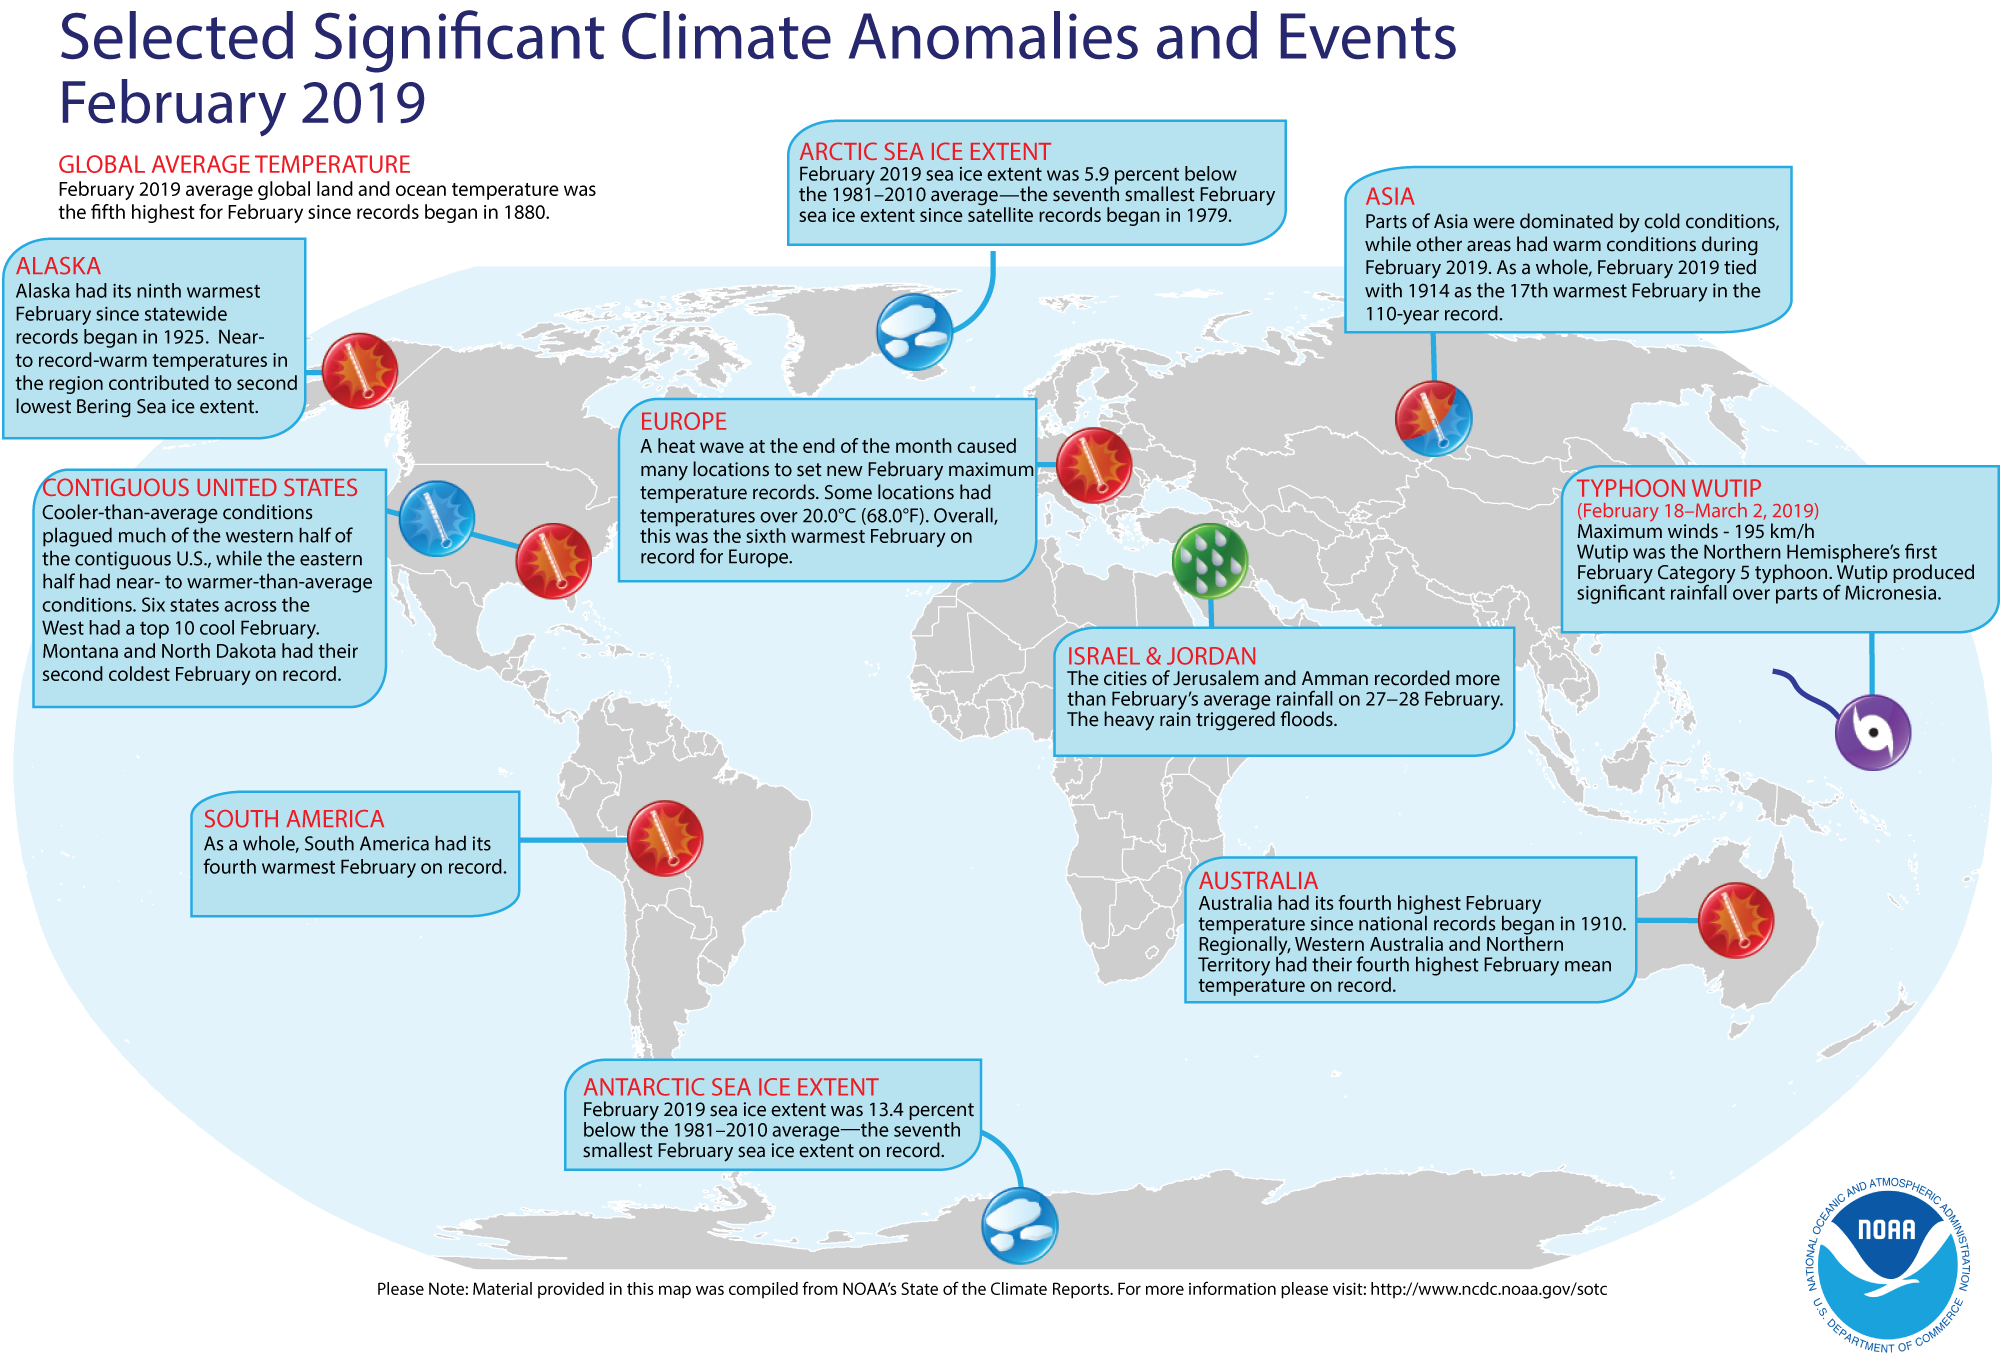 An annotated map of the world showing notable climate events that occurred in November 2018. For details, see the short bulleted list below in our story and an more details at http://www.ncdc.noaa.gov/sotc/global/2019/02.